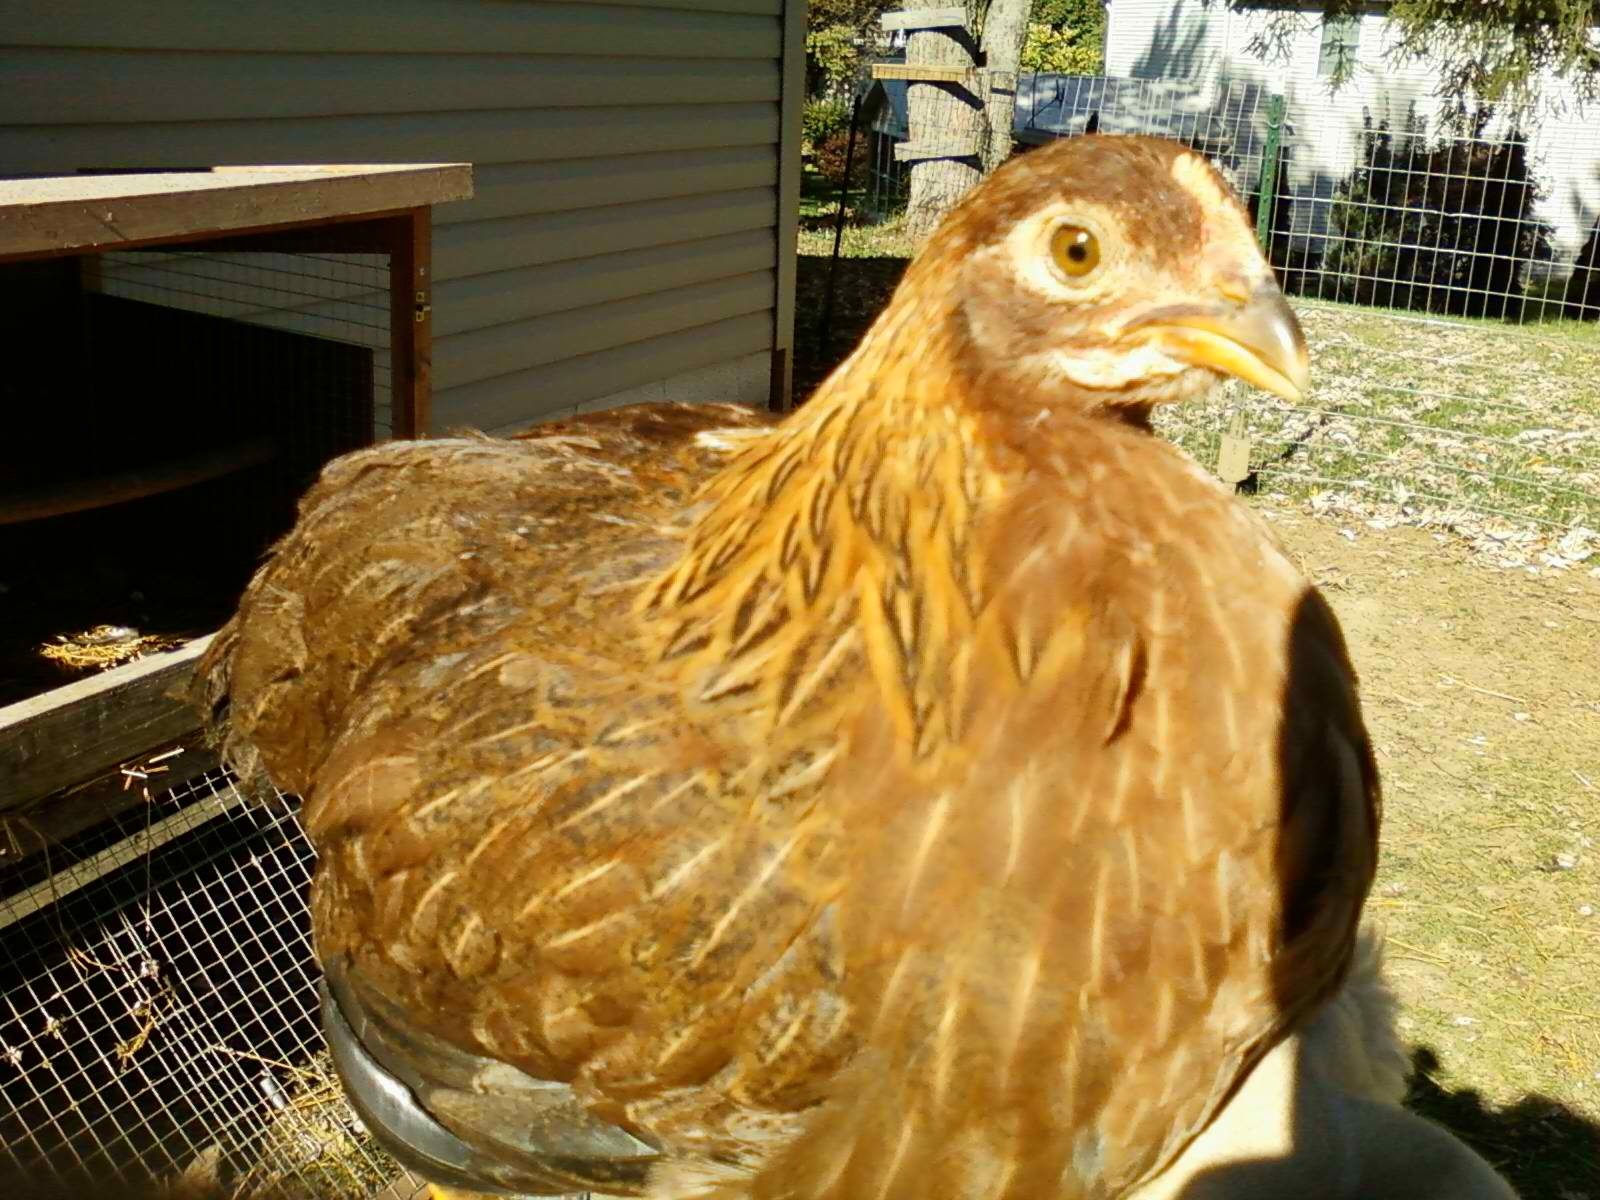 Holly, a Welsumer pullet, aged 31/2 months